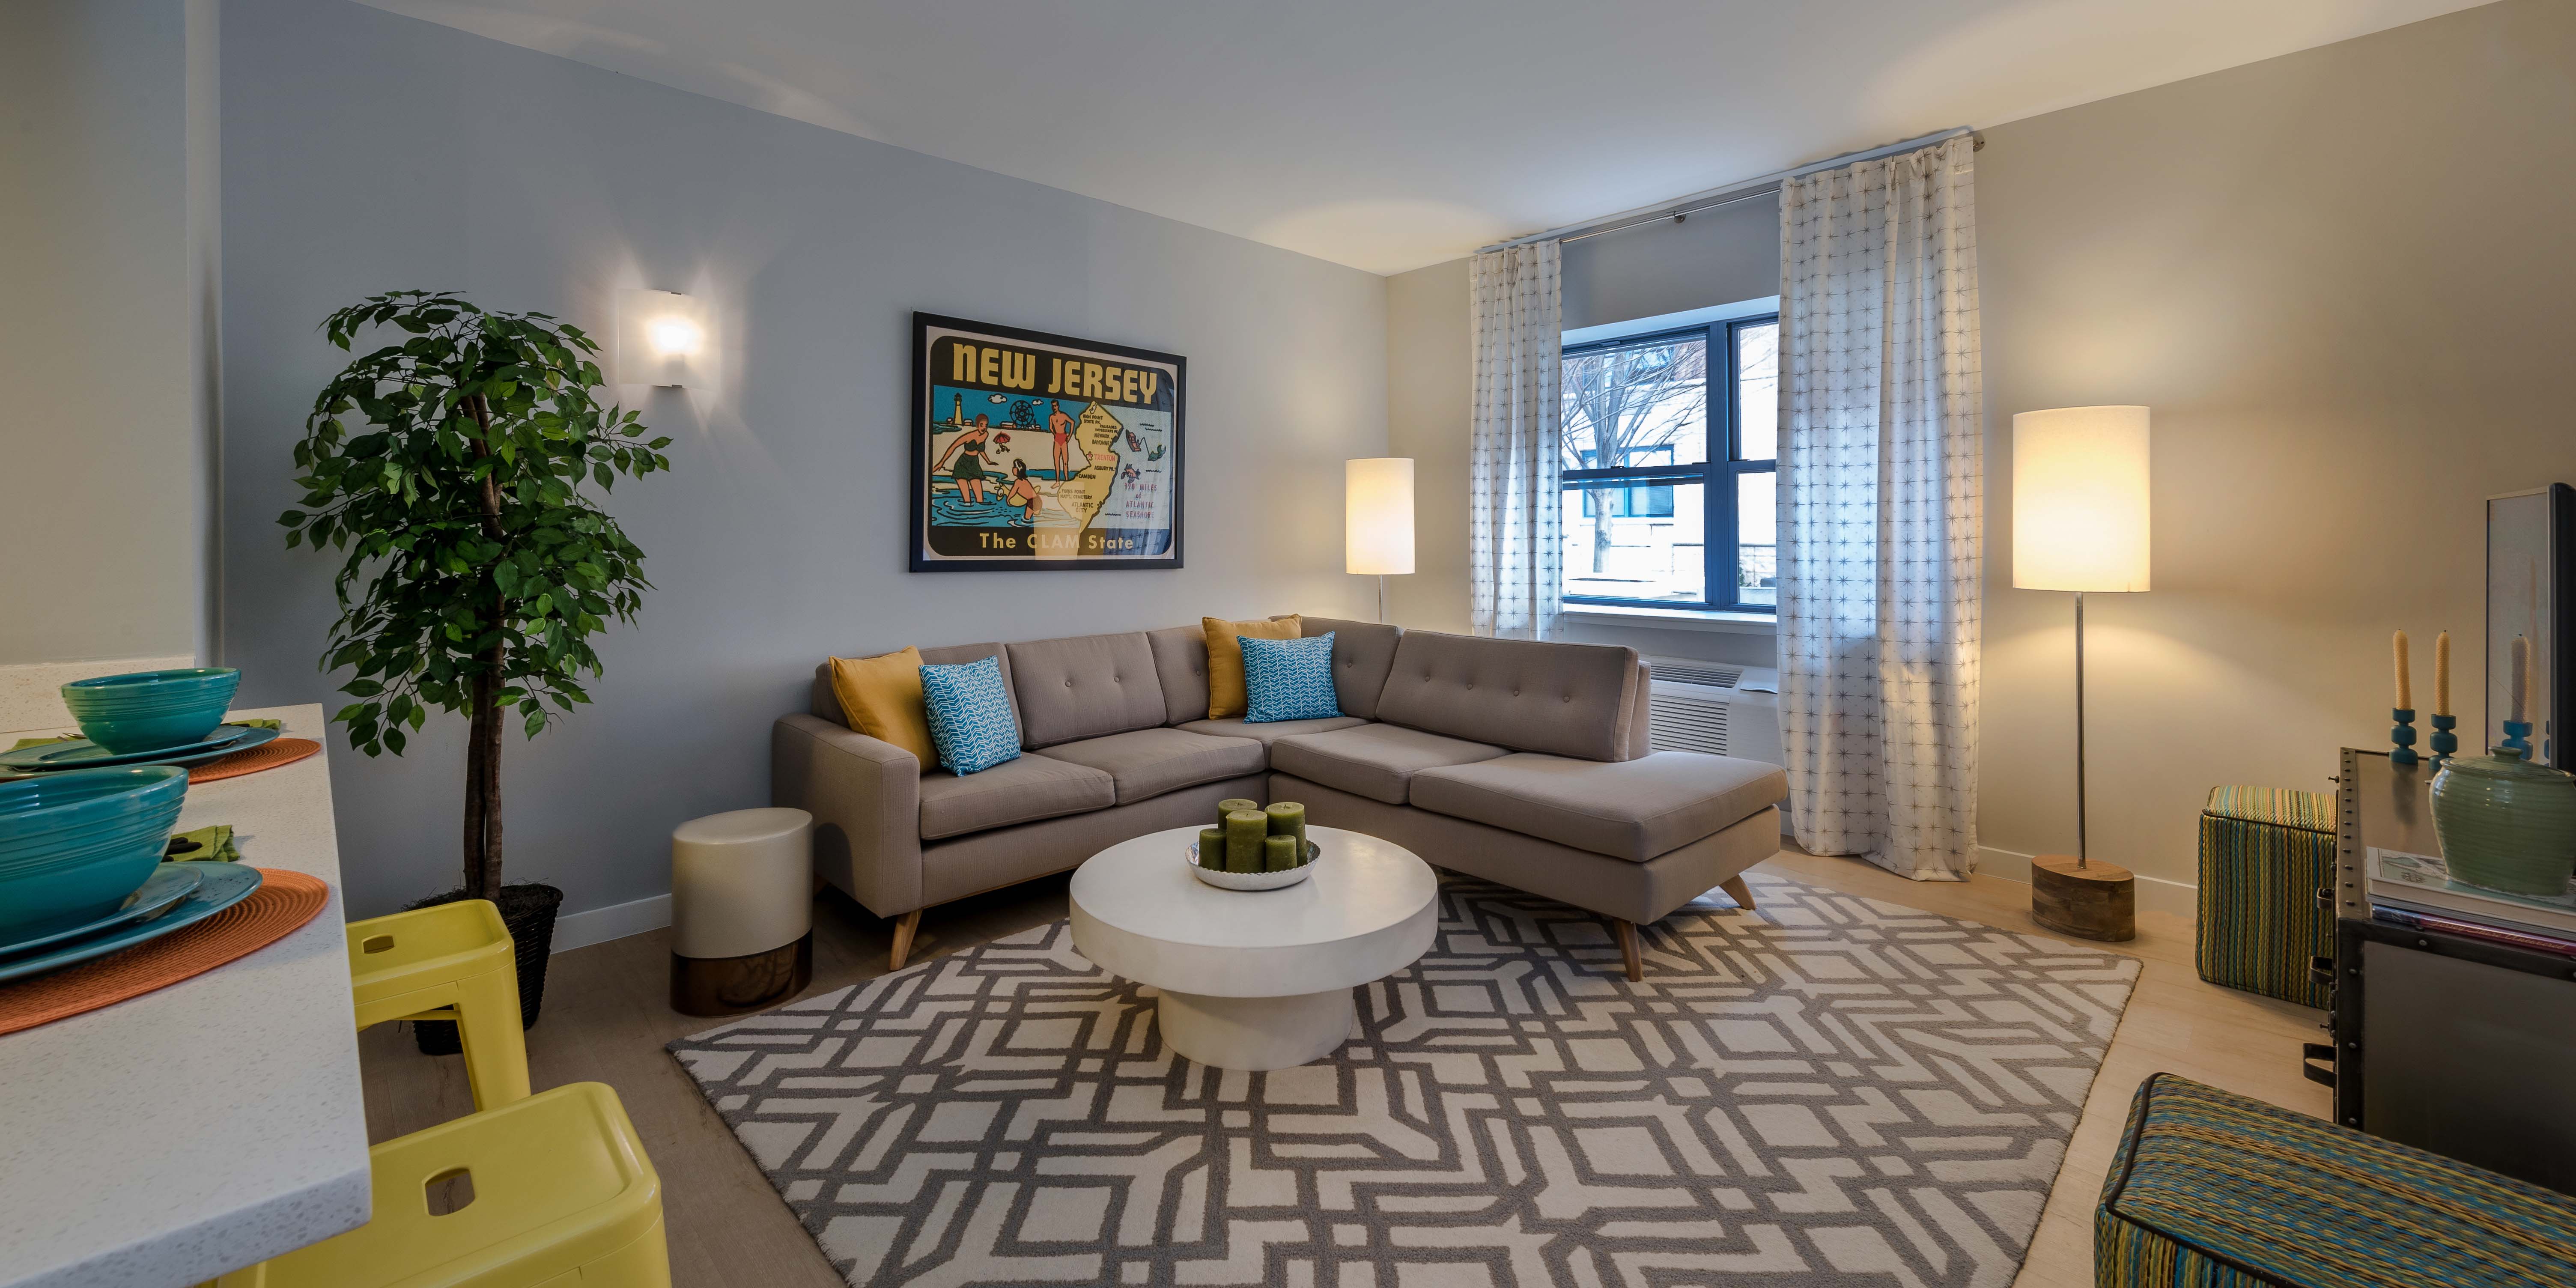 An open living room at The Monroe, Morristown, New Jersey